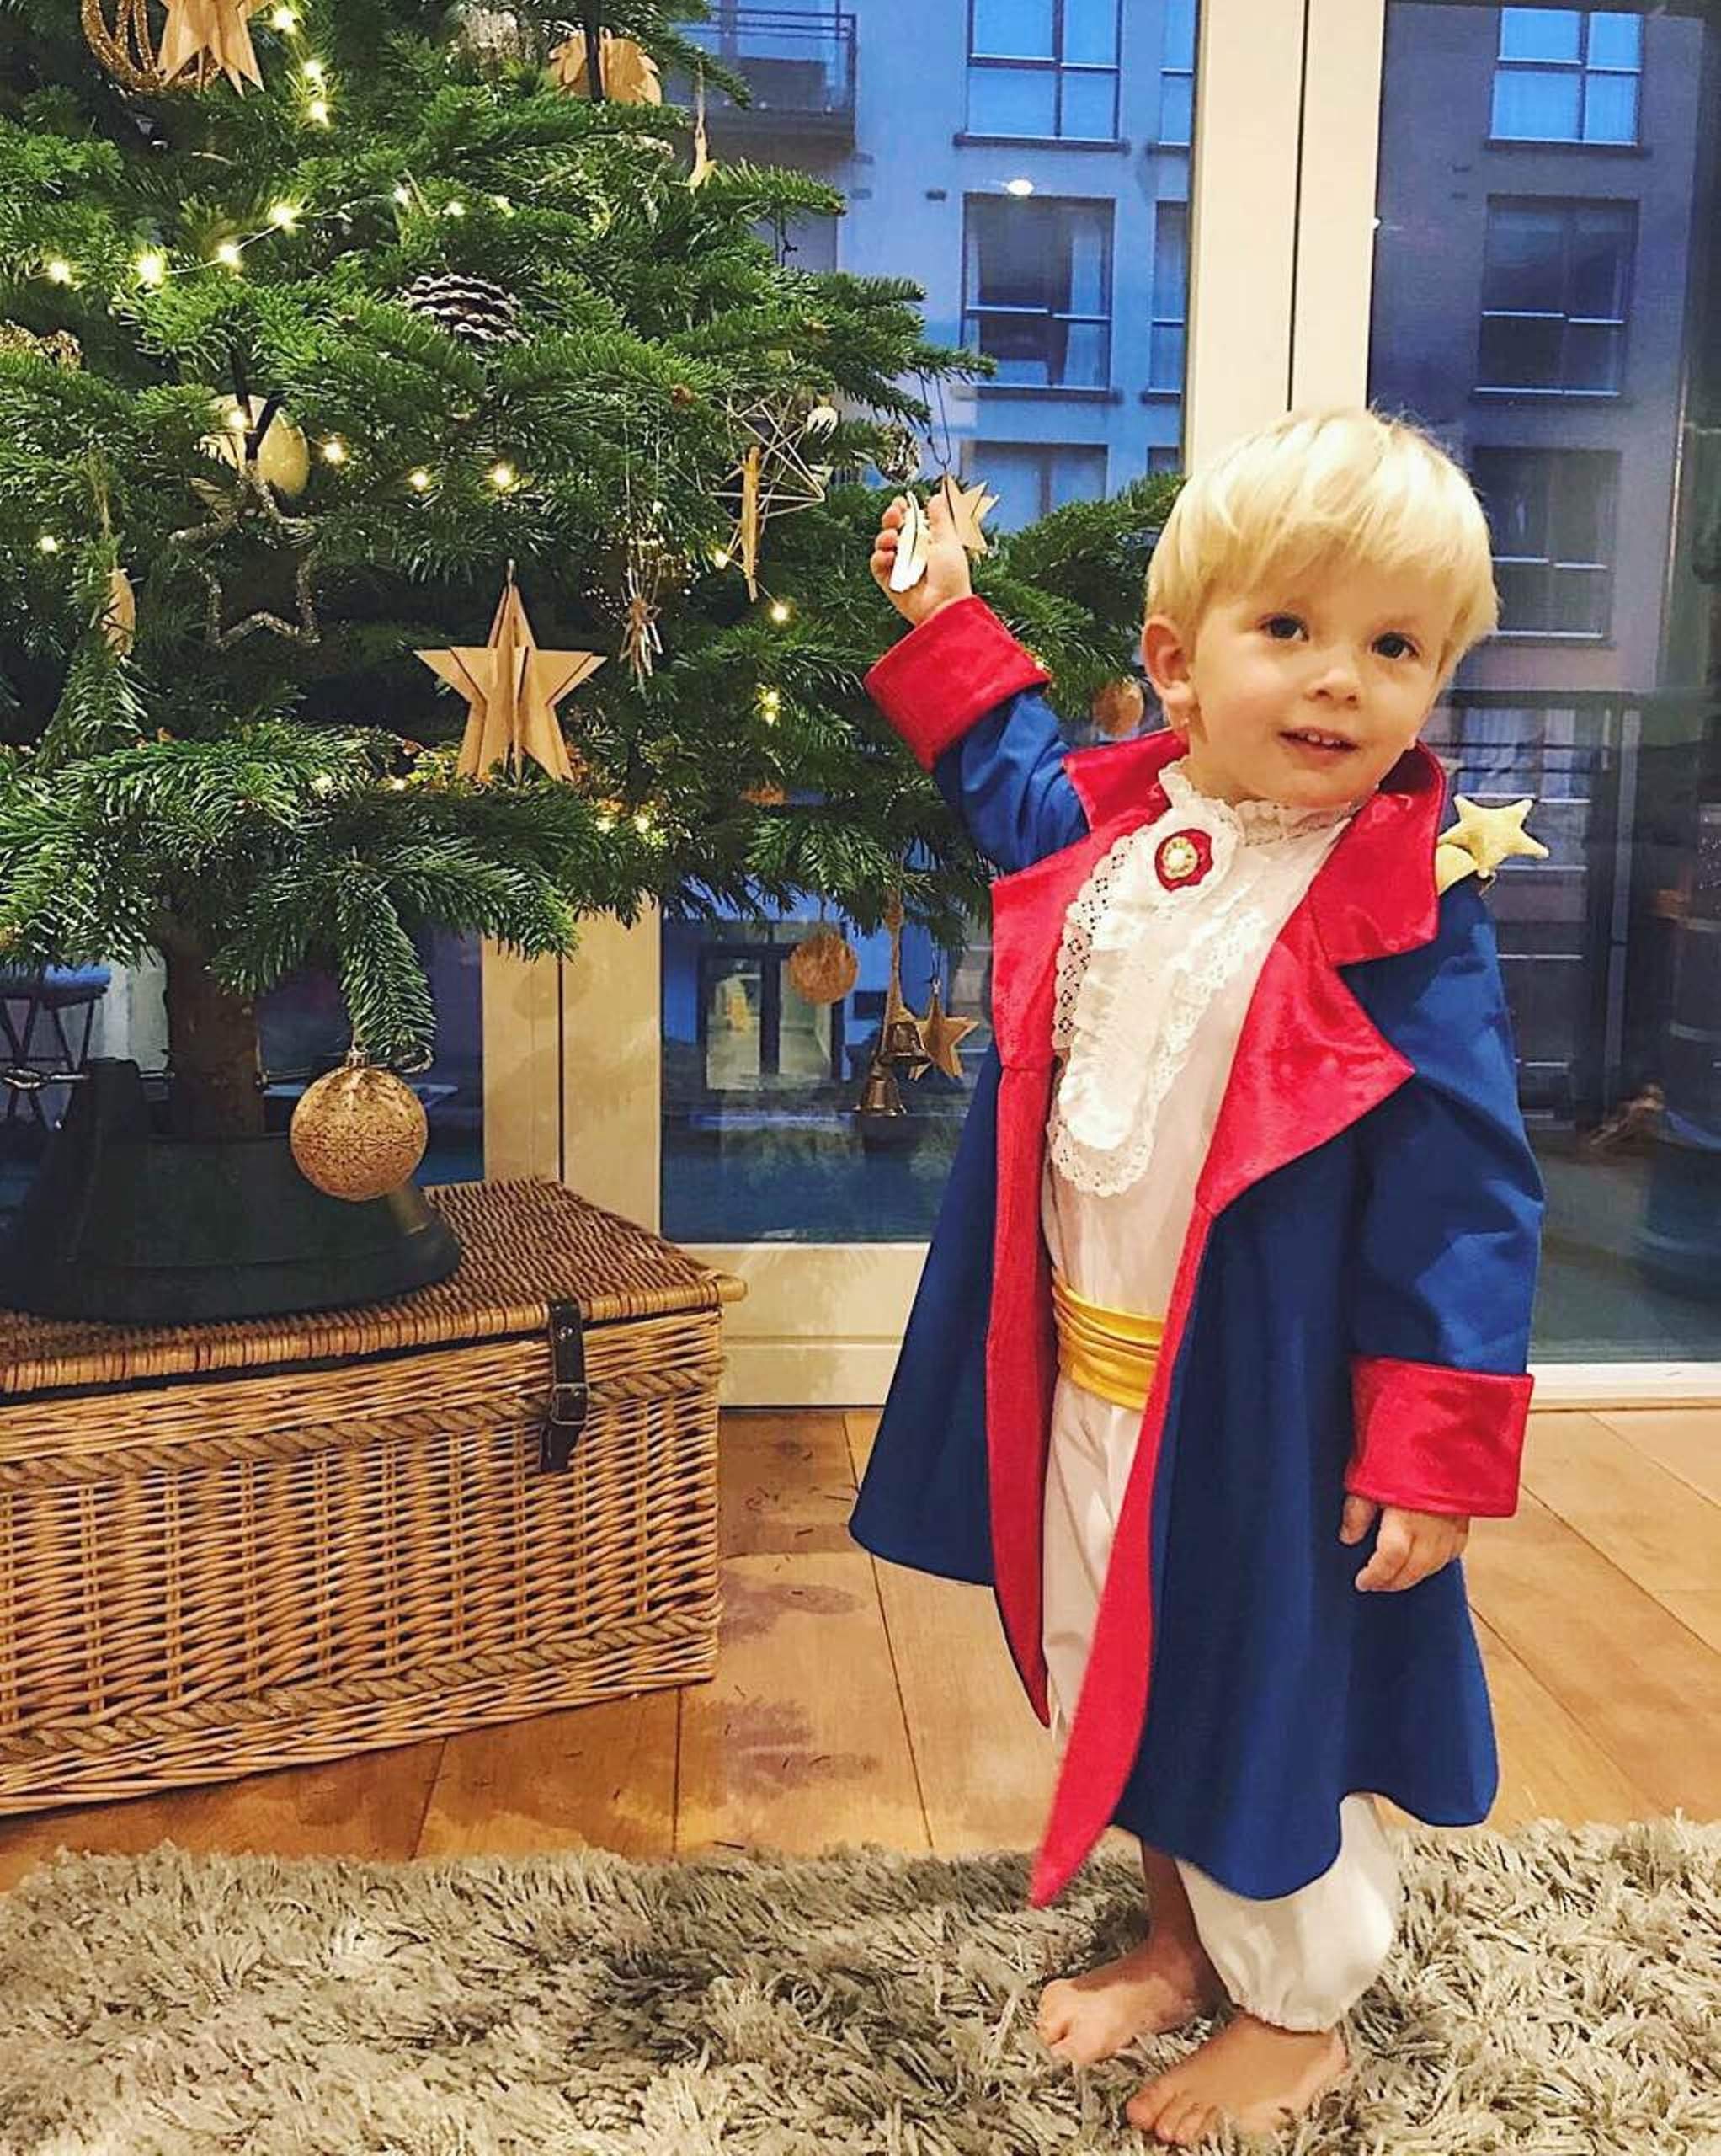 Prince's Costume for Baby Boy Toddler Blue Cloak With Red Lining